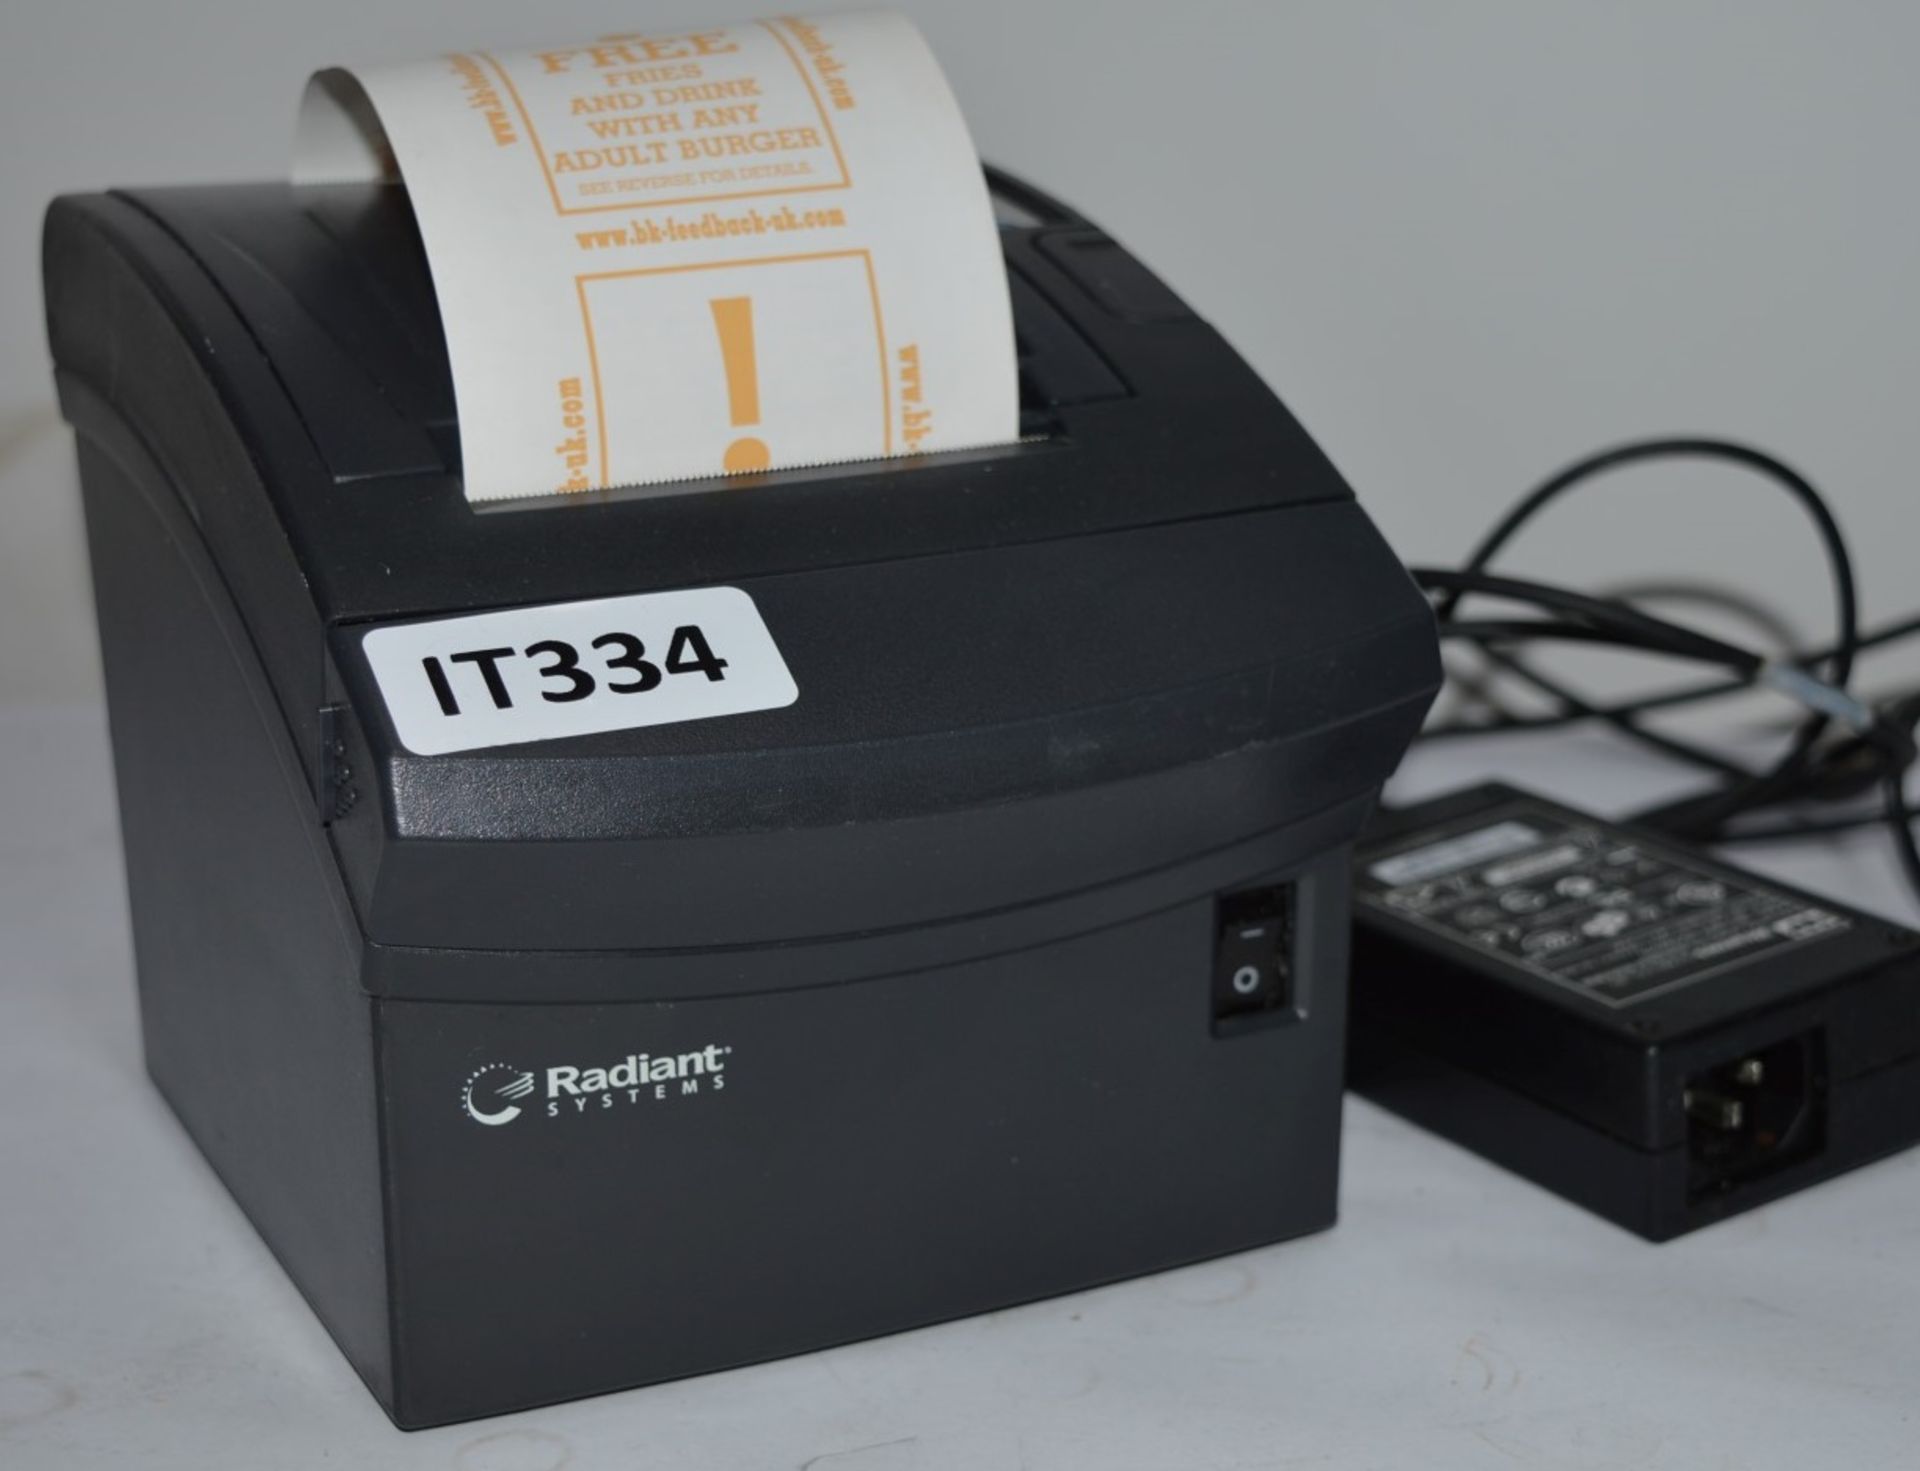 1 x Radiant Systems Bixolon PR10135 Thermal Receipt Printer - Ideal For Use in Hospitality, Retail